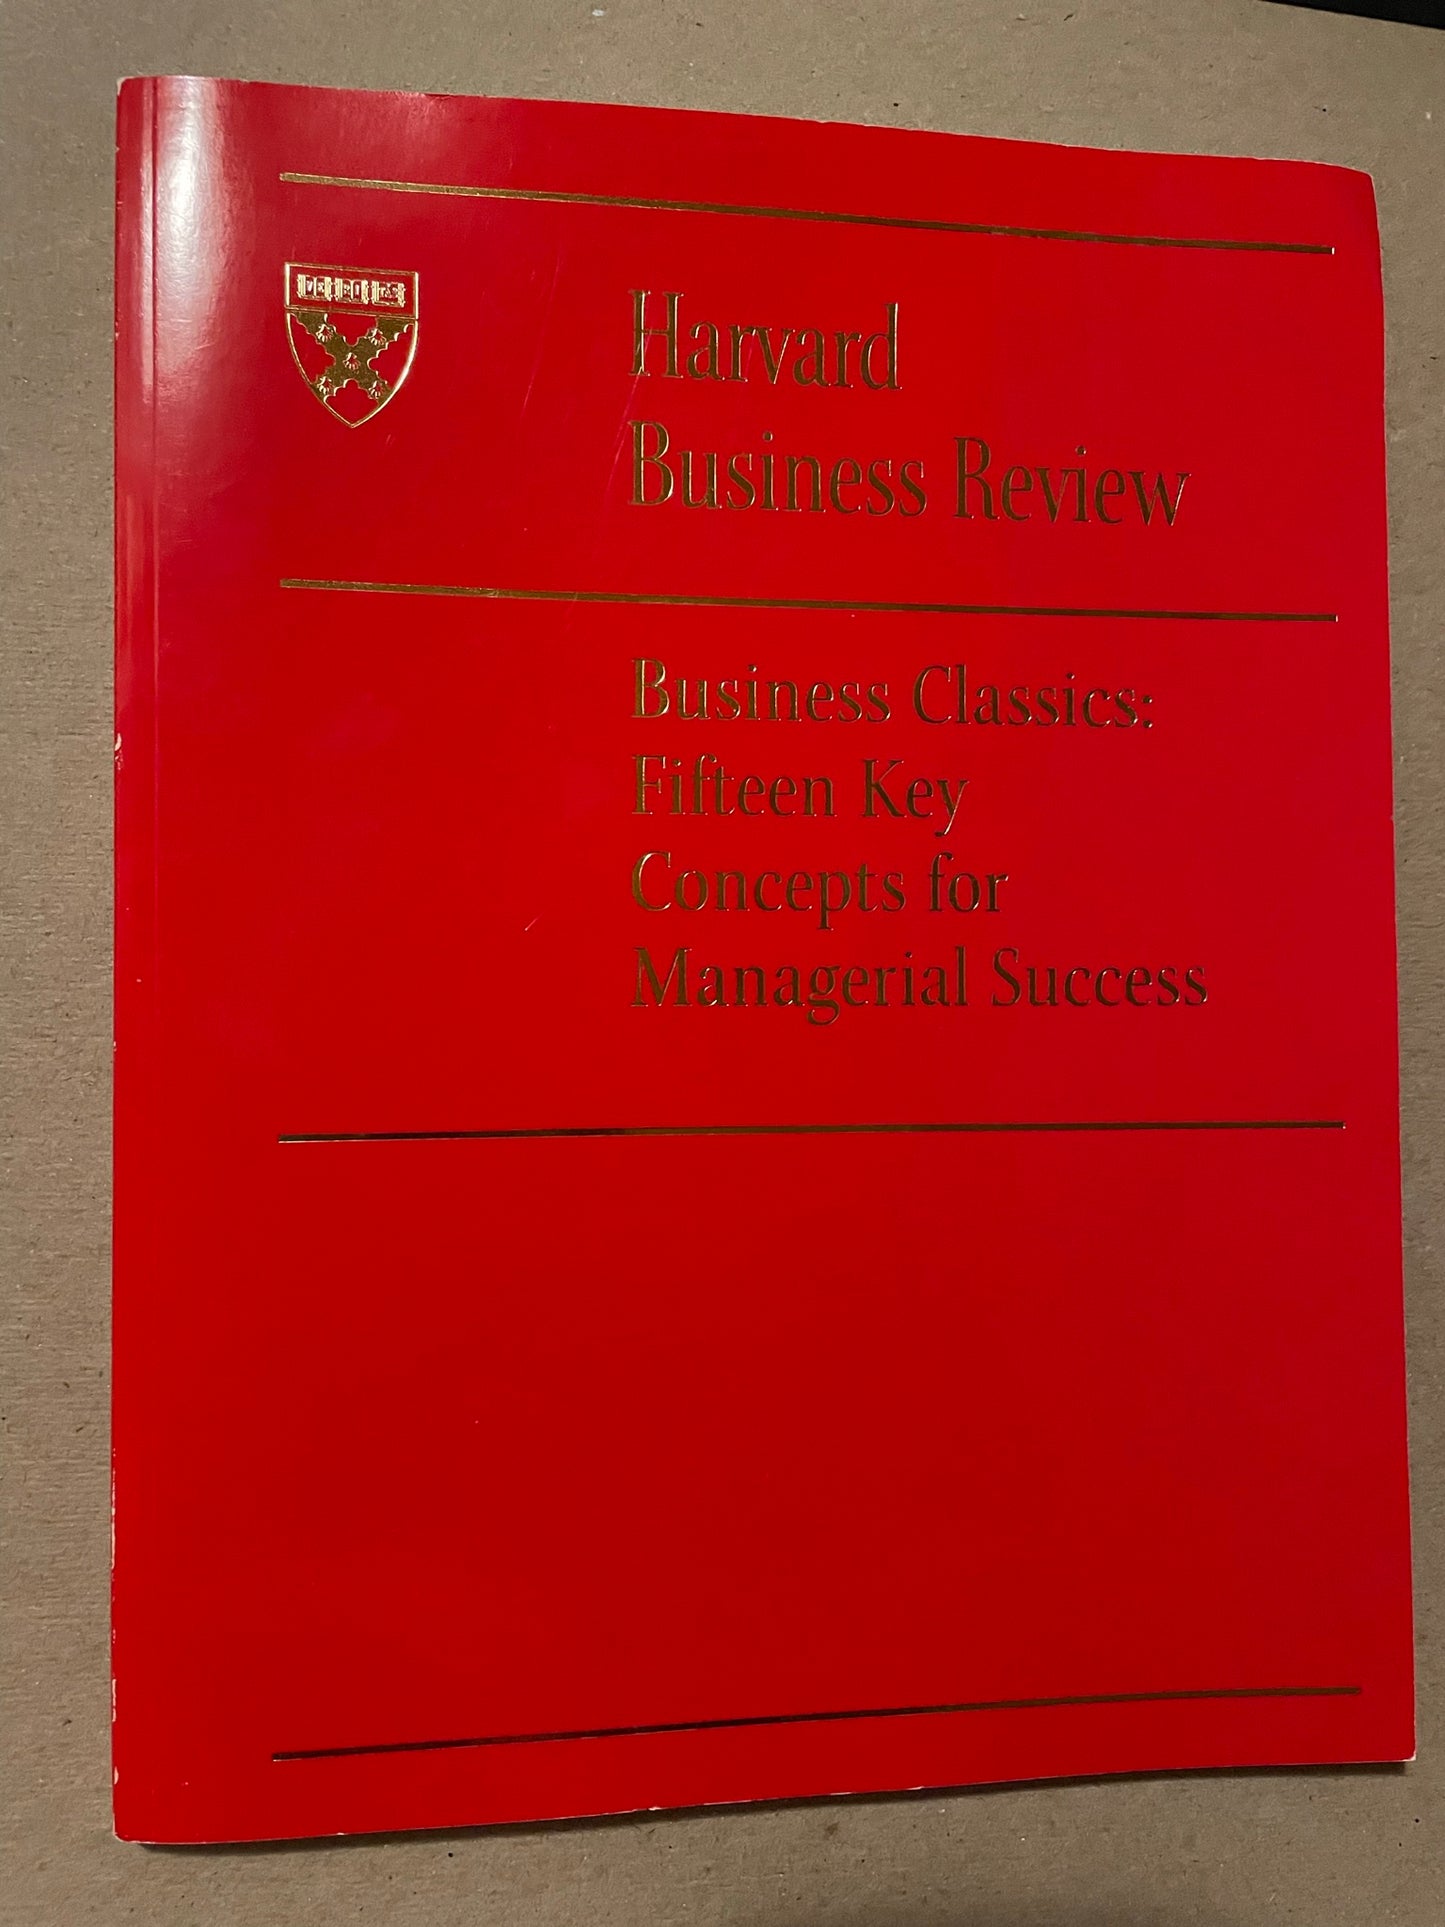 Harvard Business Review: Business Classics Fifteen Key Concepts for Managerial Success (1998)